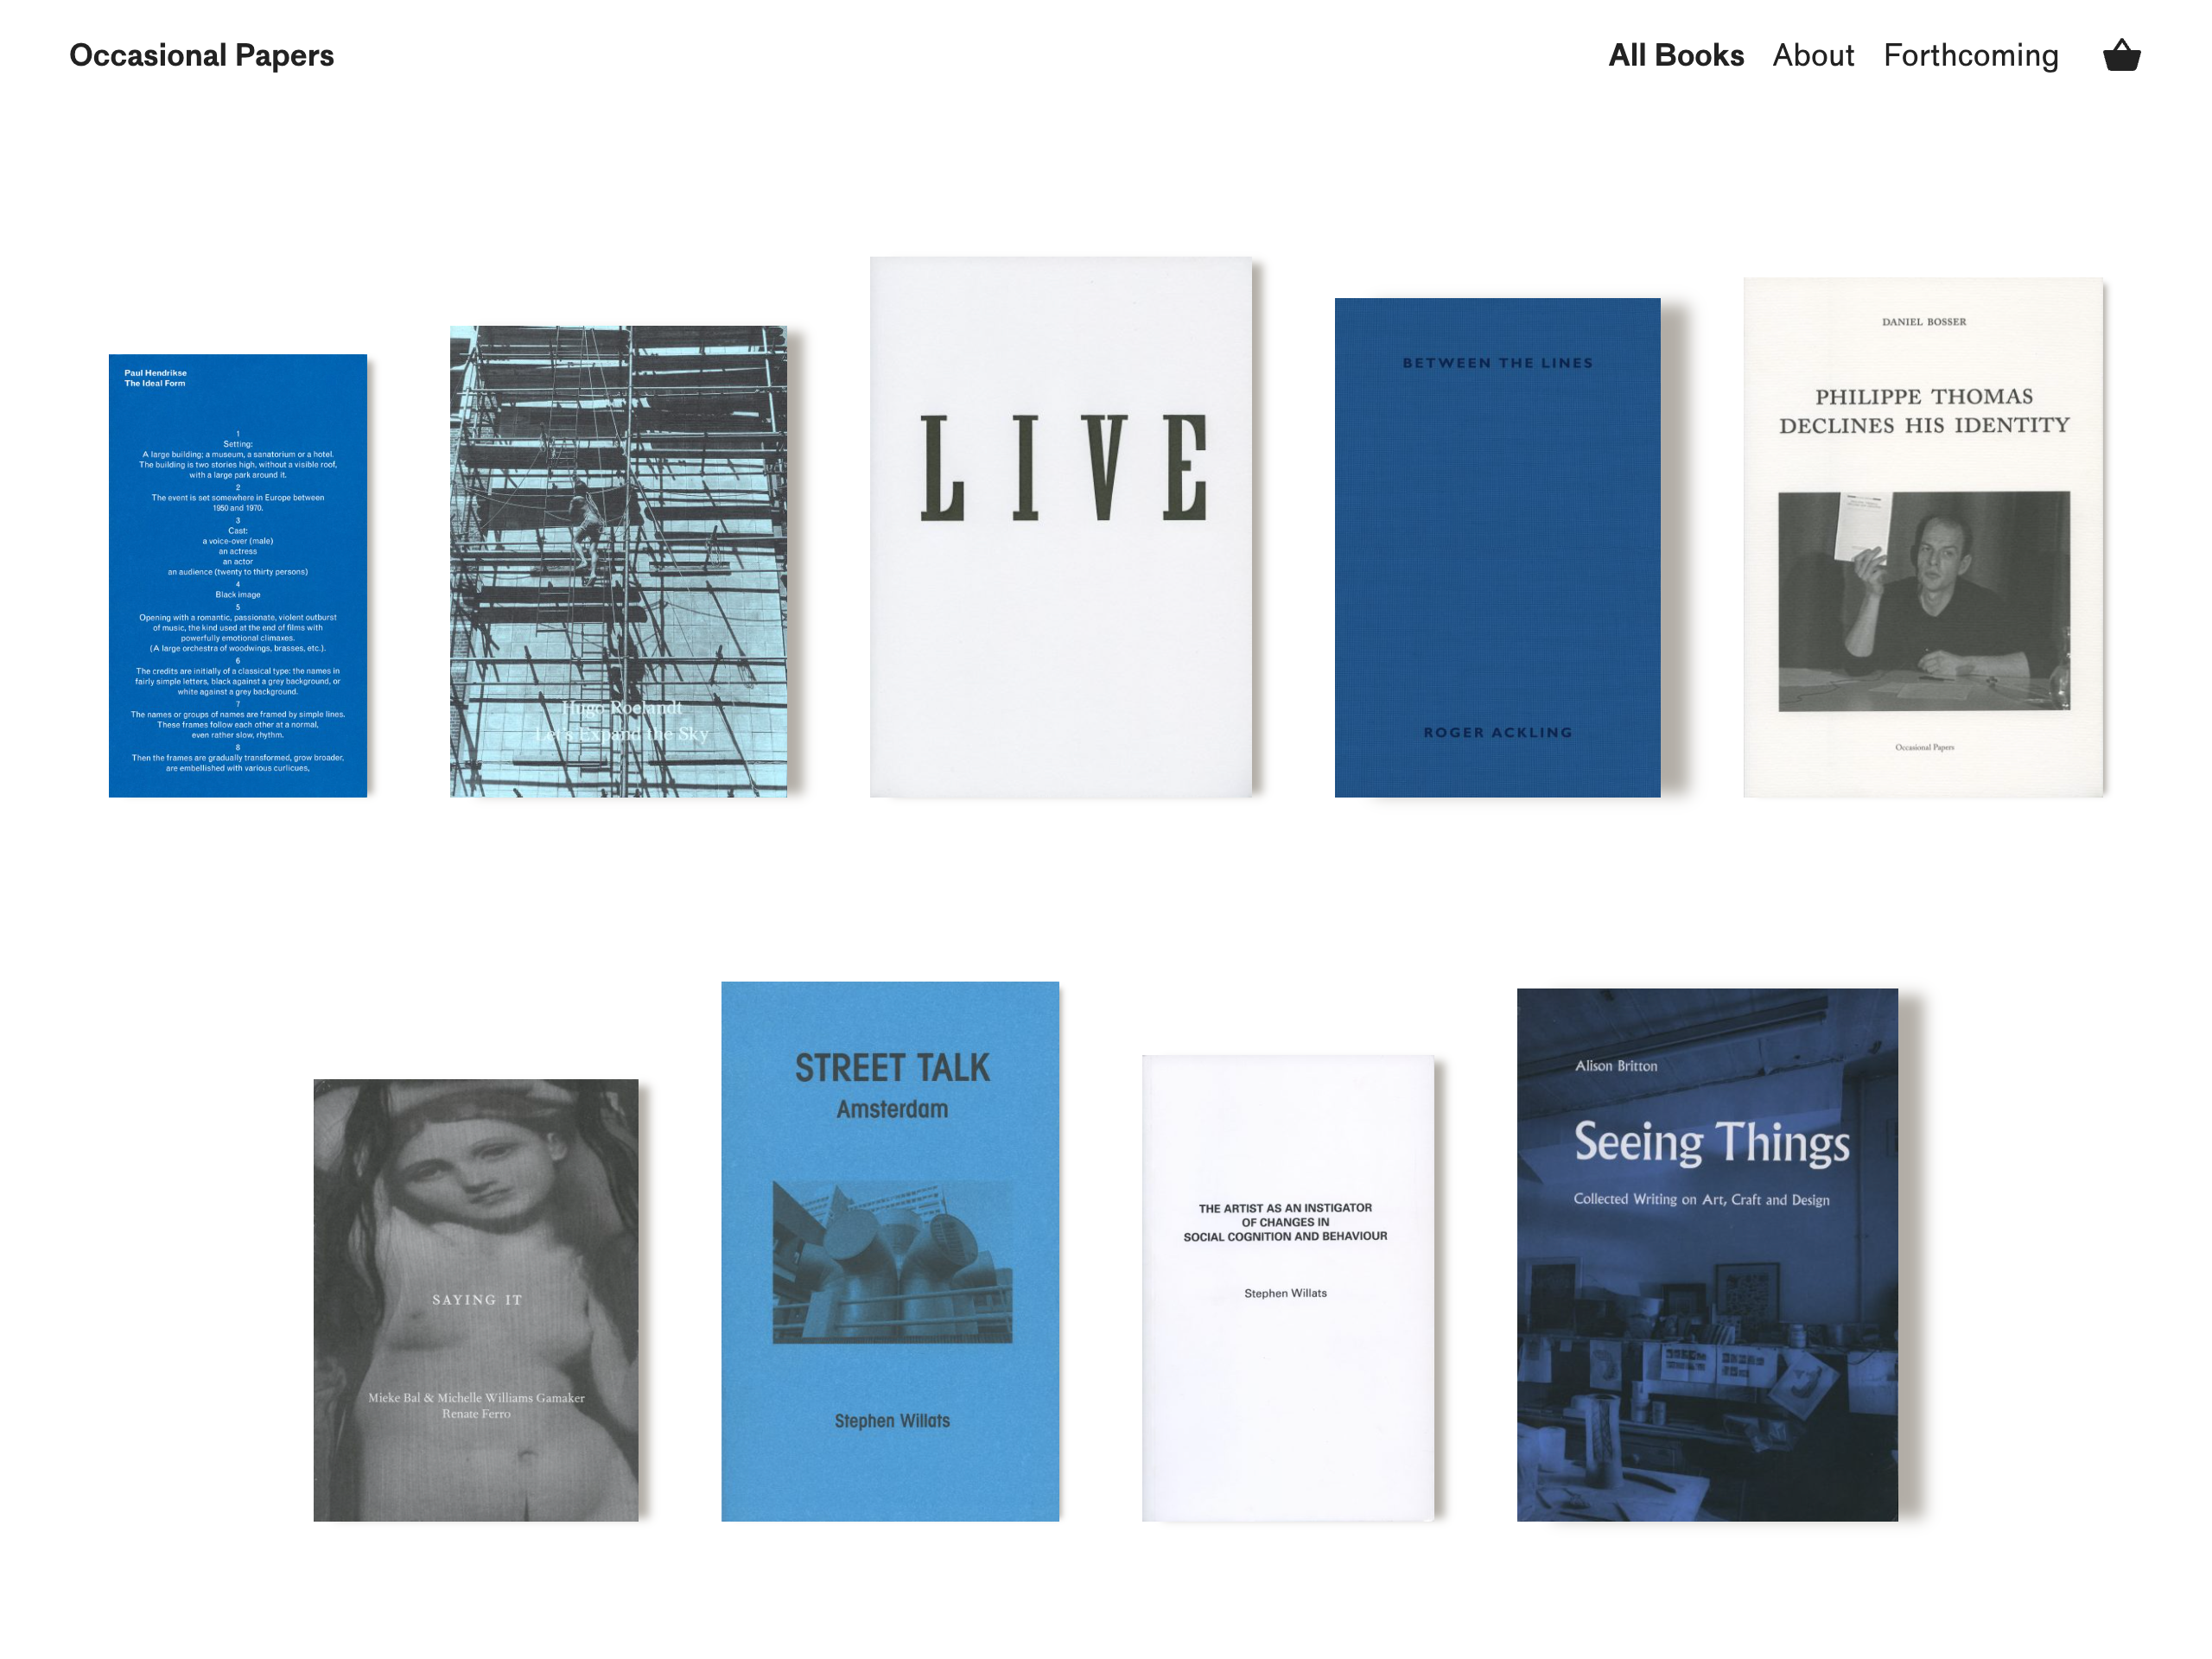 Occasional Papers homepage showing blue-coloured books